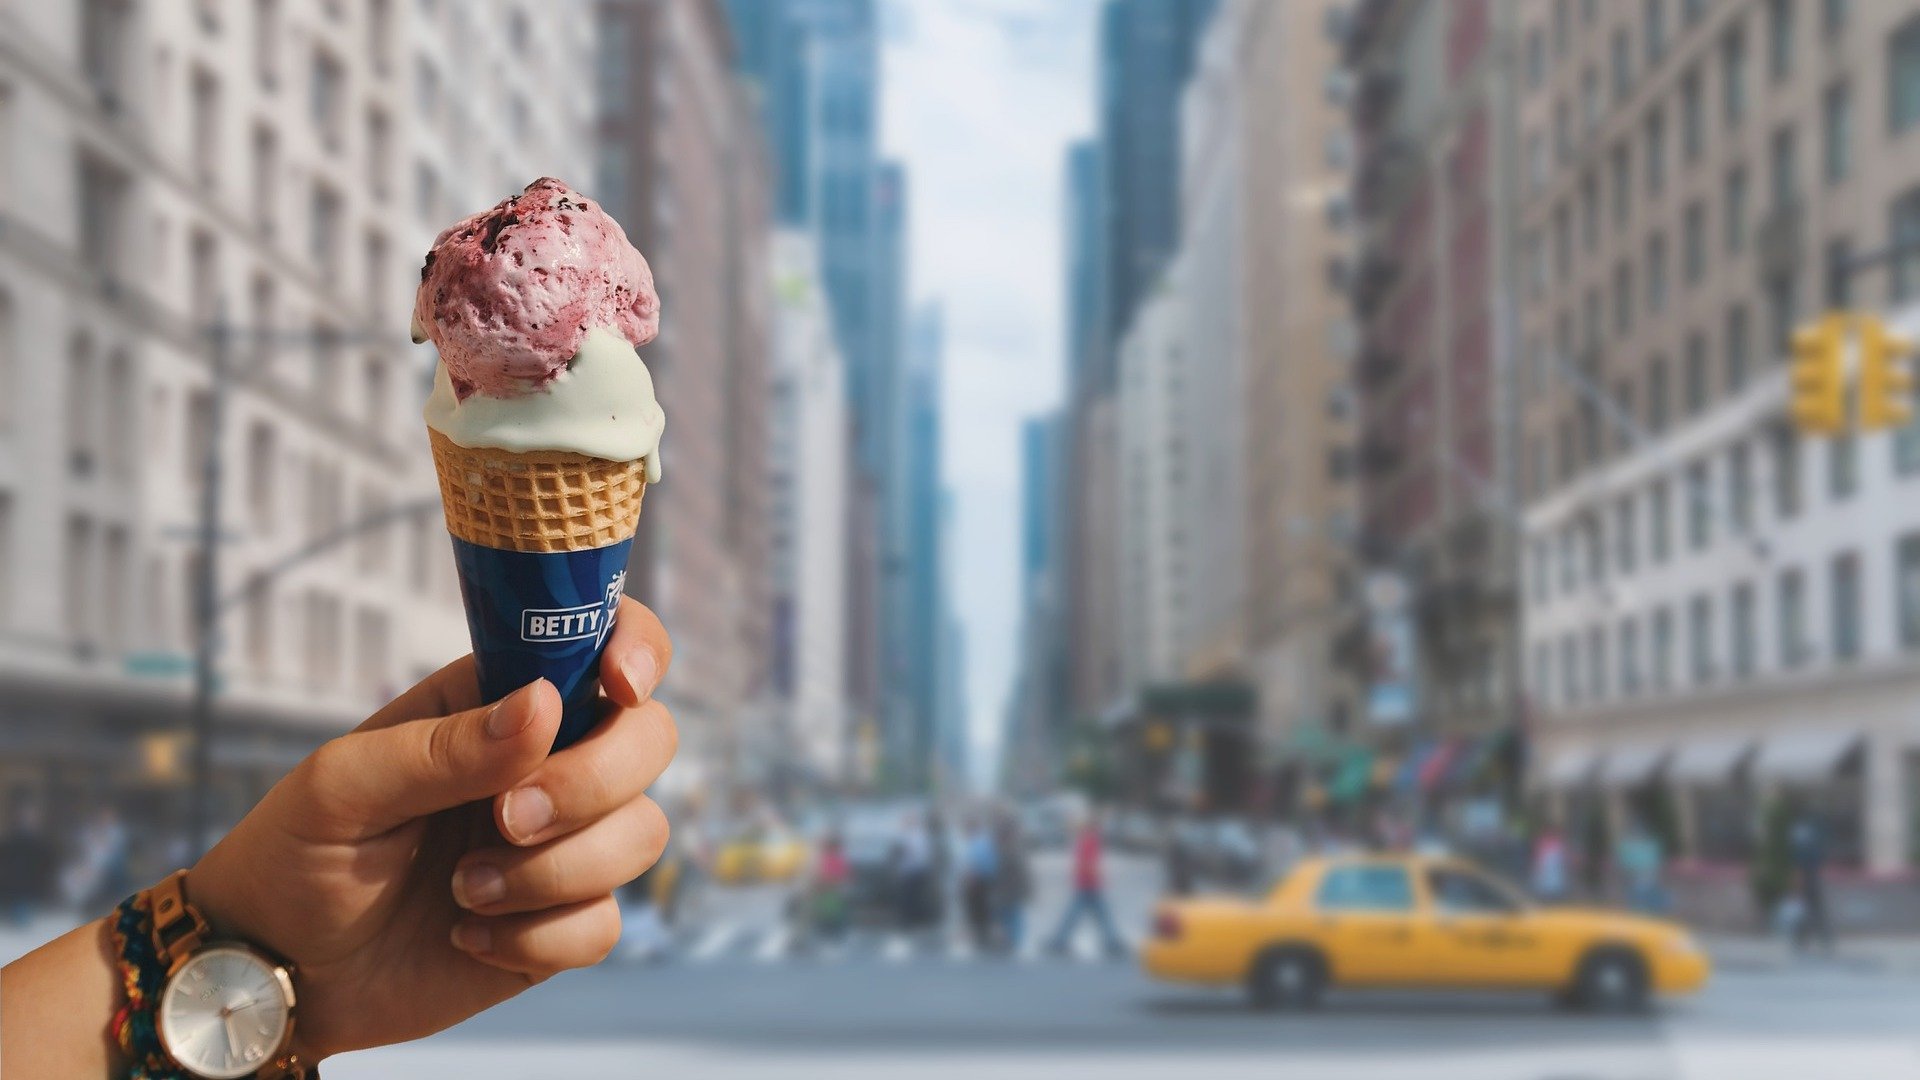 A person enjoying an ice cream in New York City